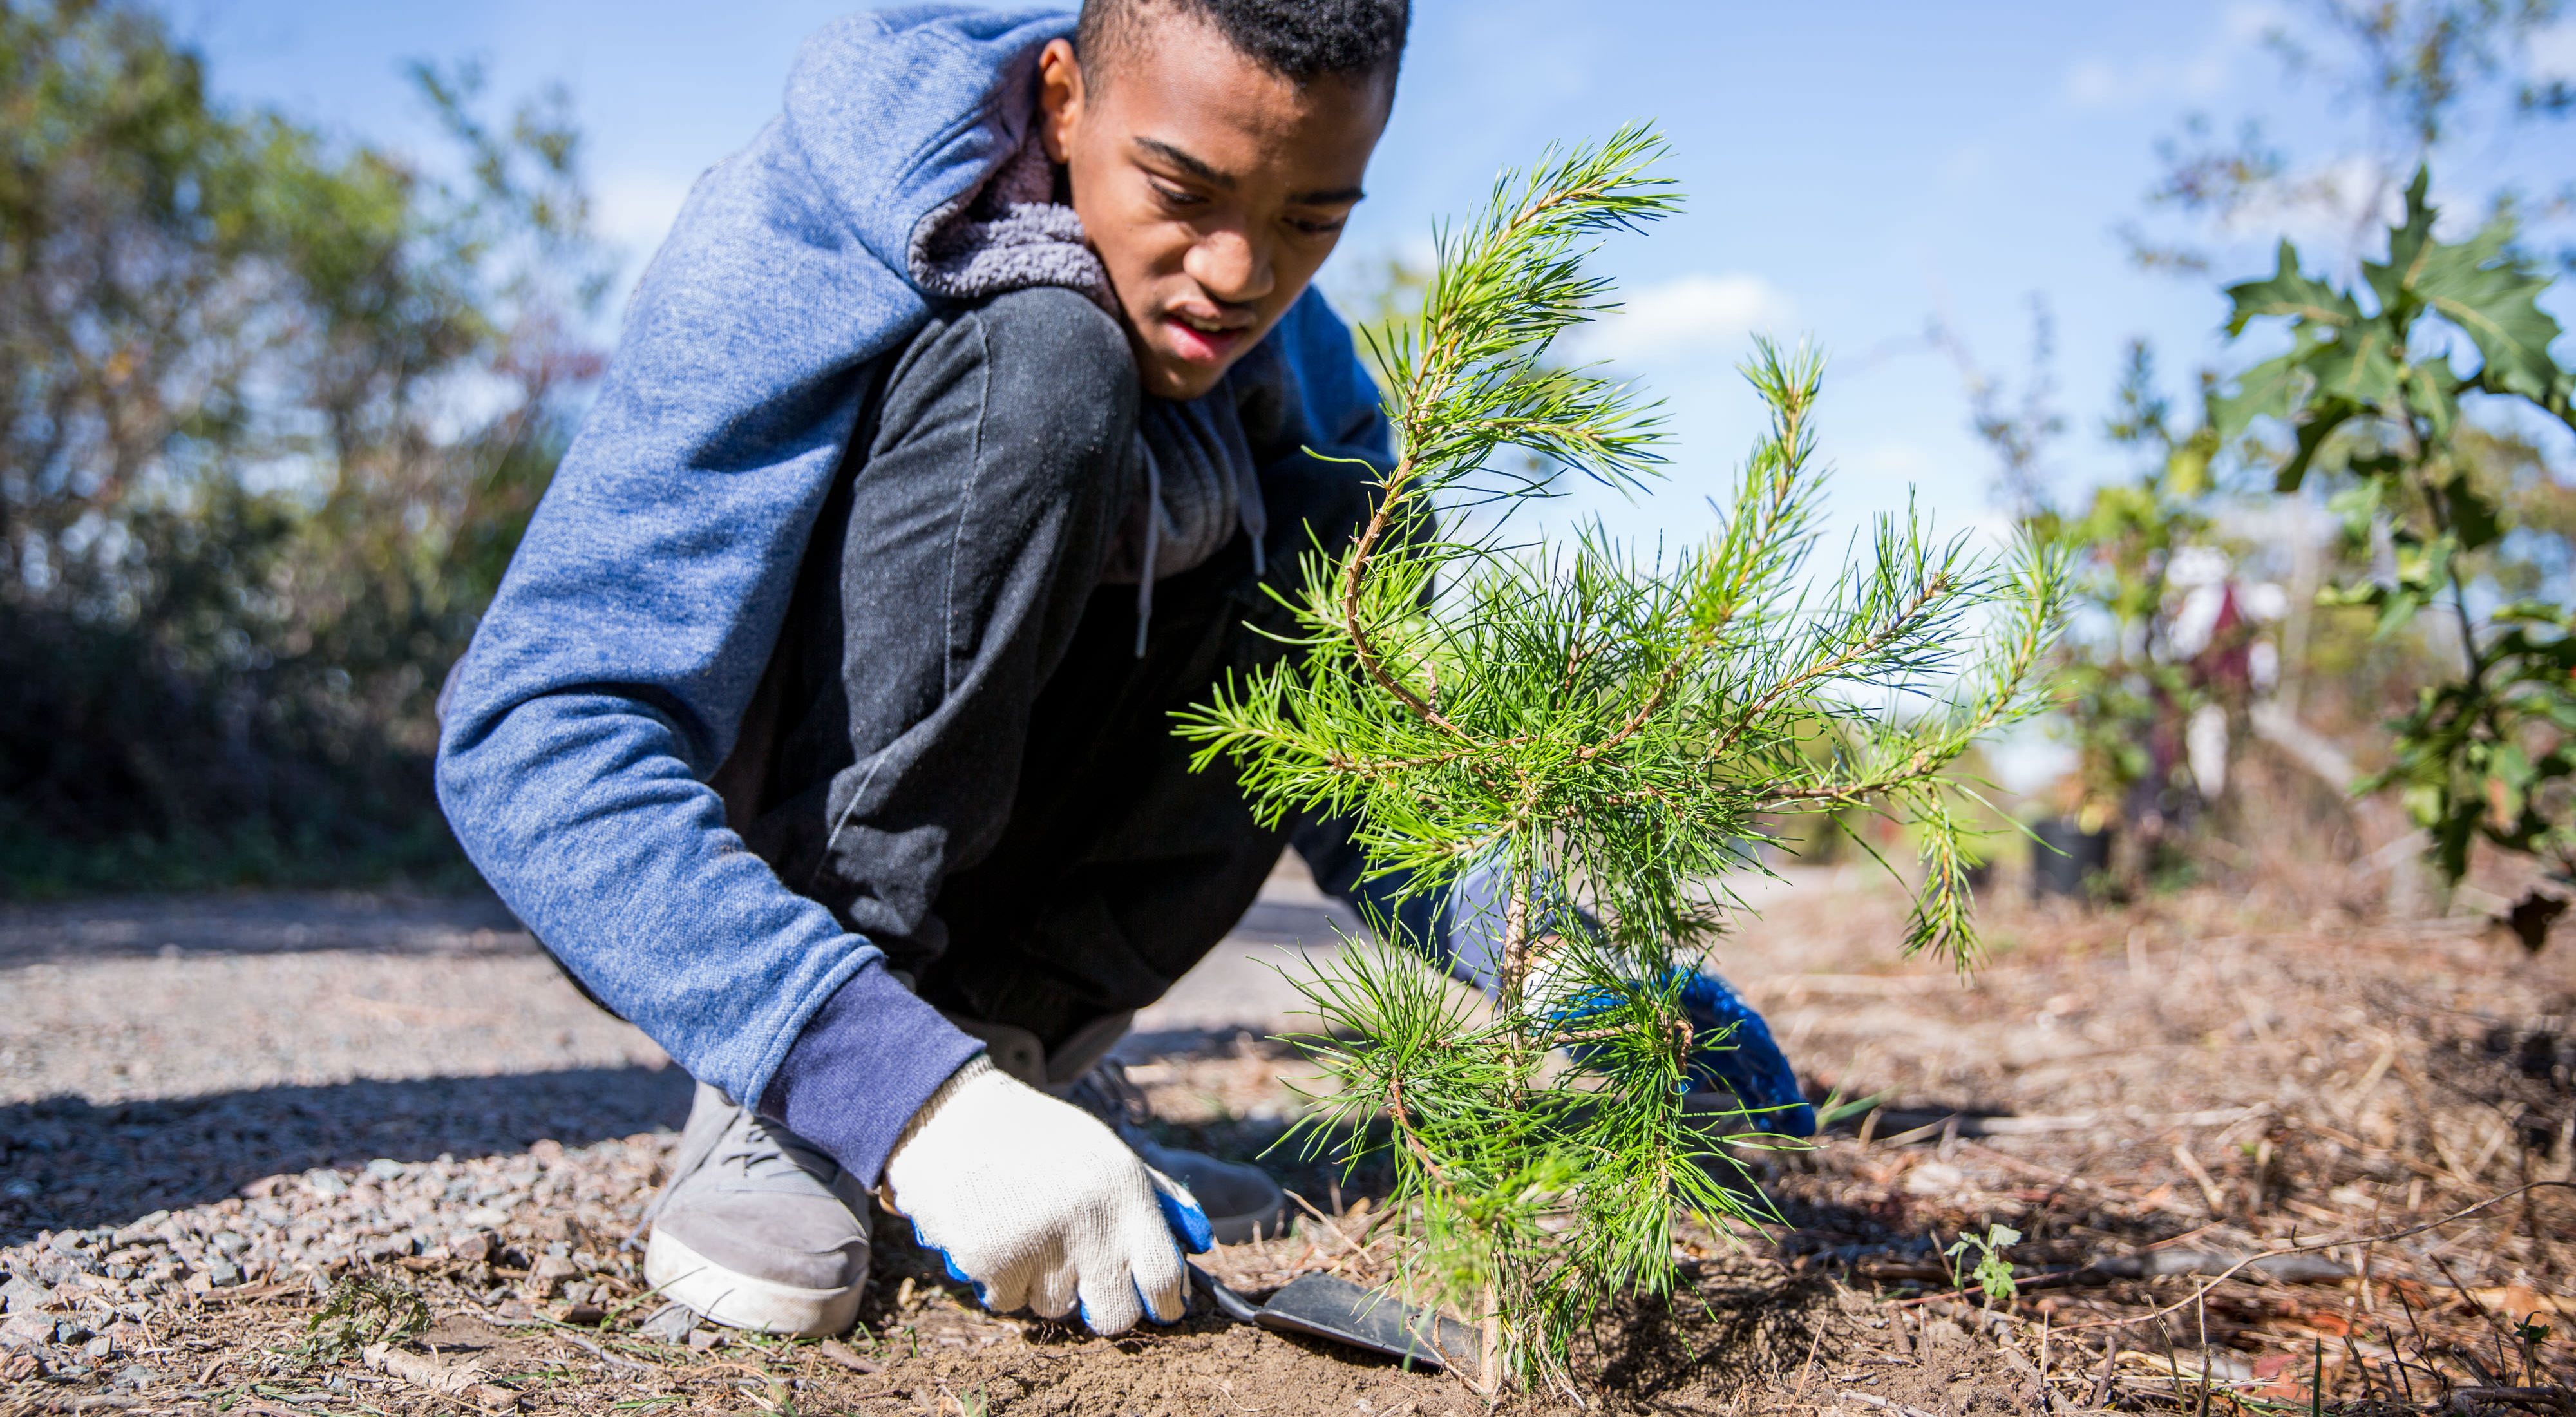 The Conservancy’s Urban Conservation program in New York City hosted a large-scale tree-planting event at Jamaica Bay Wildlife Refuge.